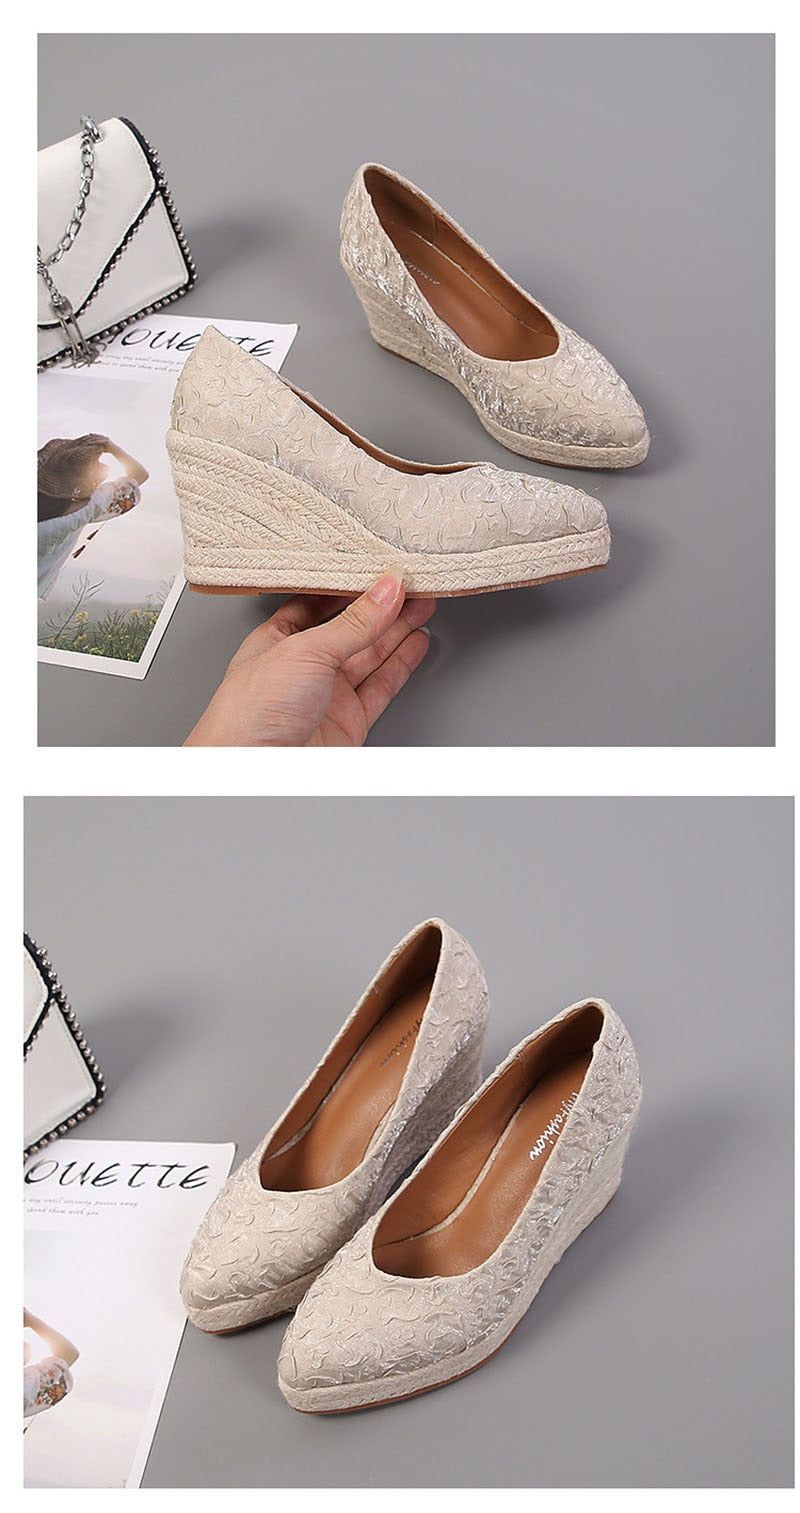 Fashion High Heels Women Wedges Casual Shoes GCSTY31 Retro Pumps A3800 - Touchy Style .